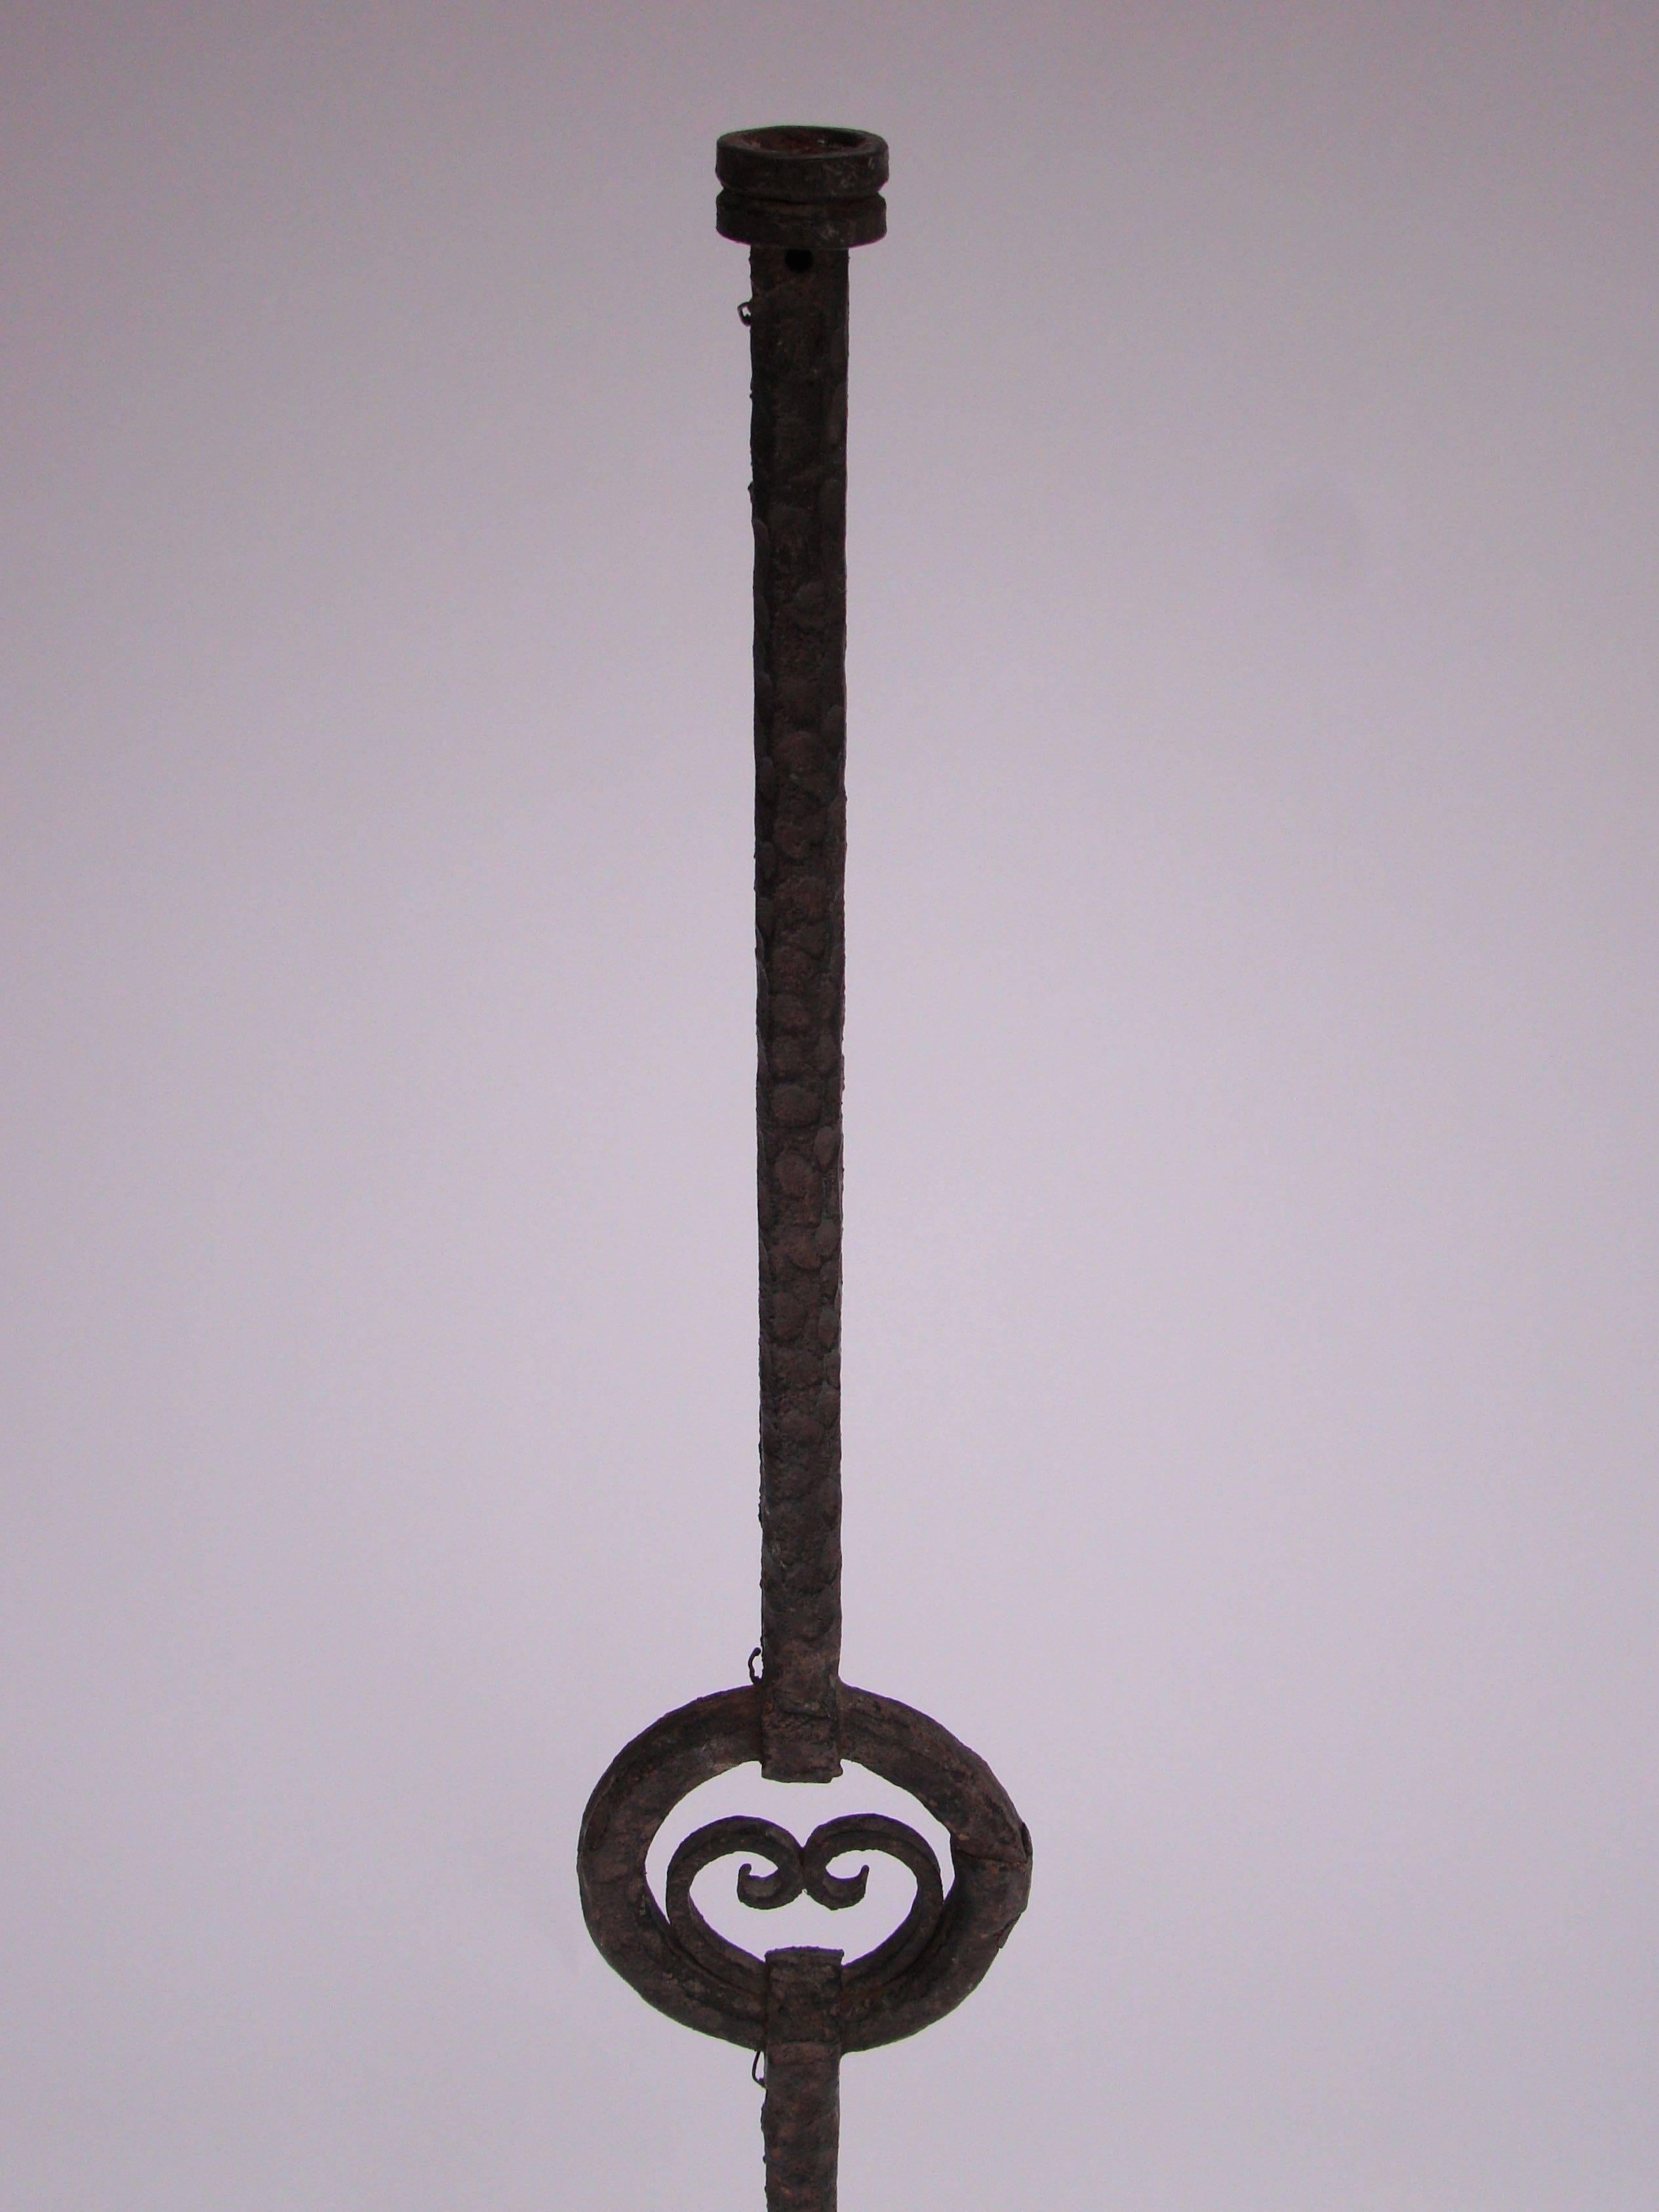 Original floor lamp in wrought iron decorated with a scrolling medallion, circa 1940.
The lighting system is missing.